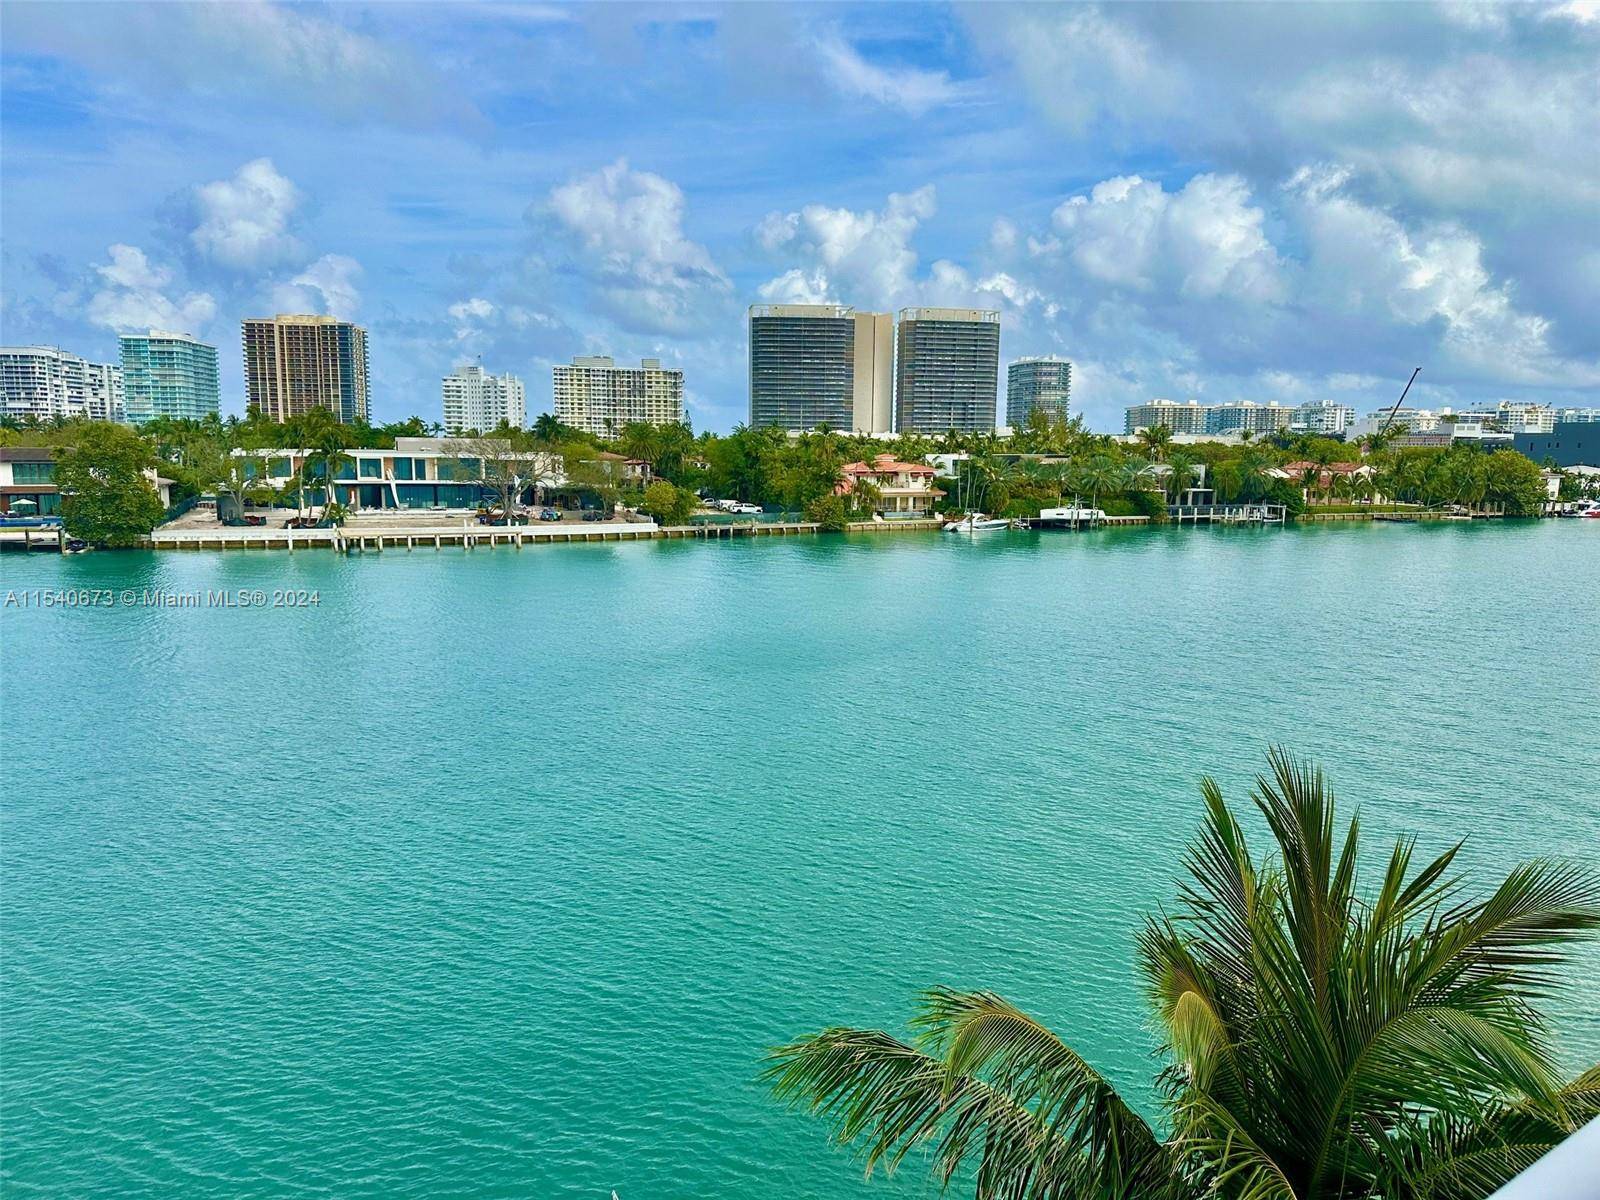 La Mare Signature 701 offers a ONCE in a LIFETIME Opportunity to buy an ENTIRE FLOOR in a Luxury, Waterfront Miami Condo.